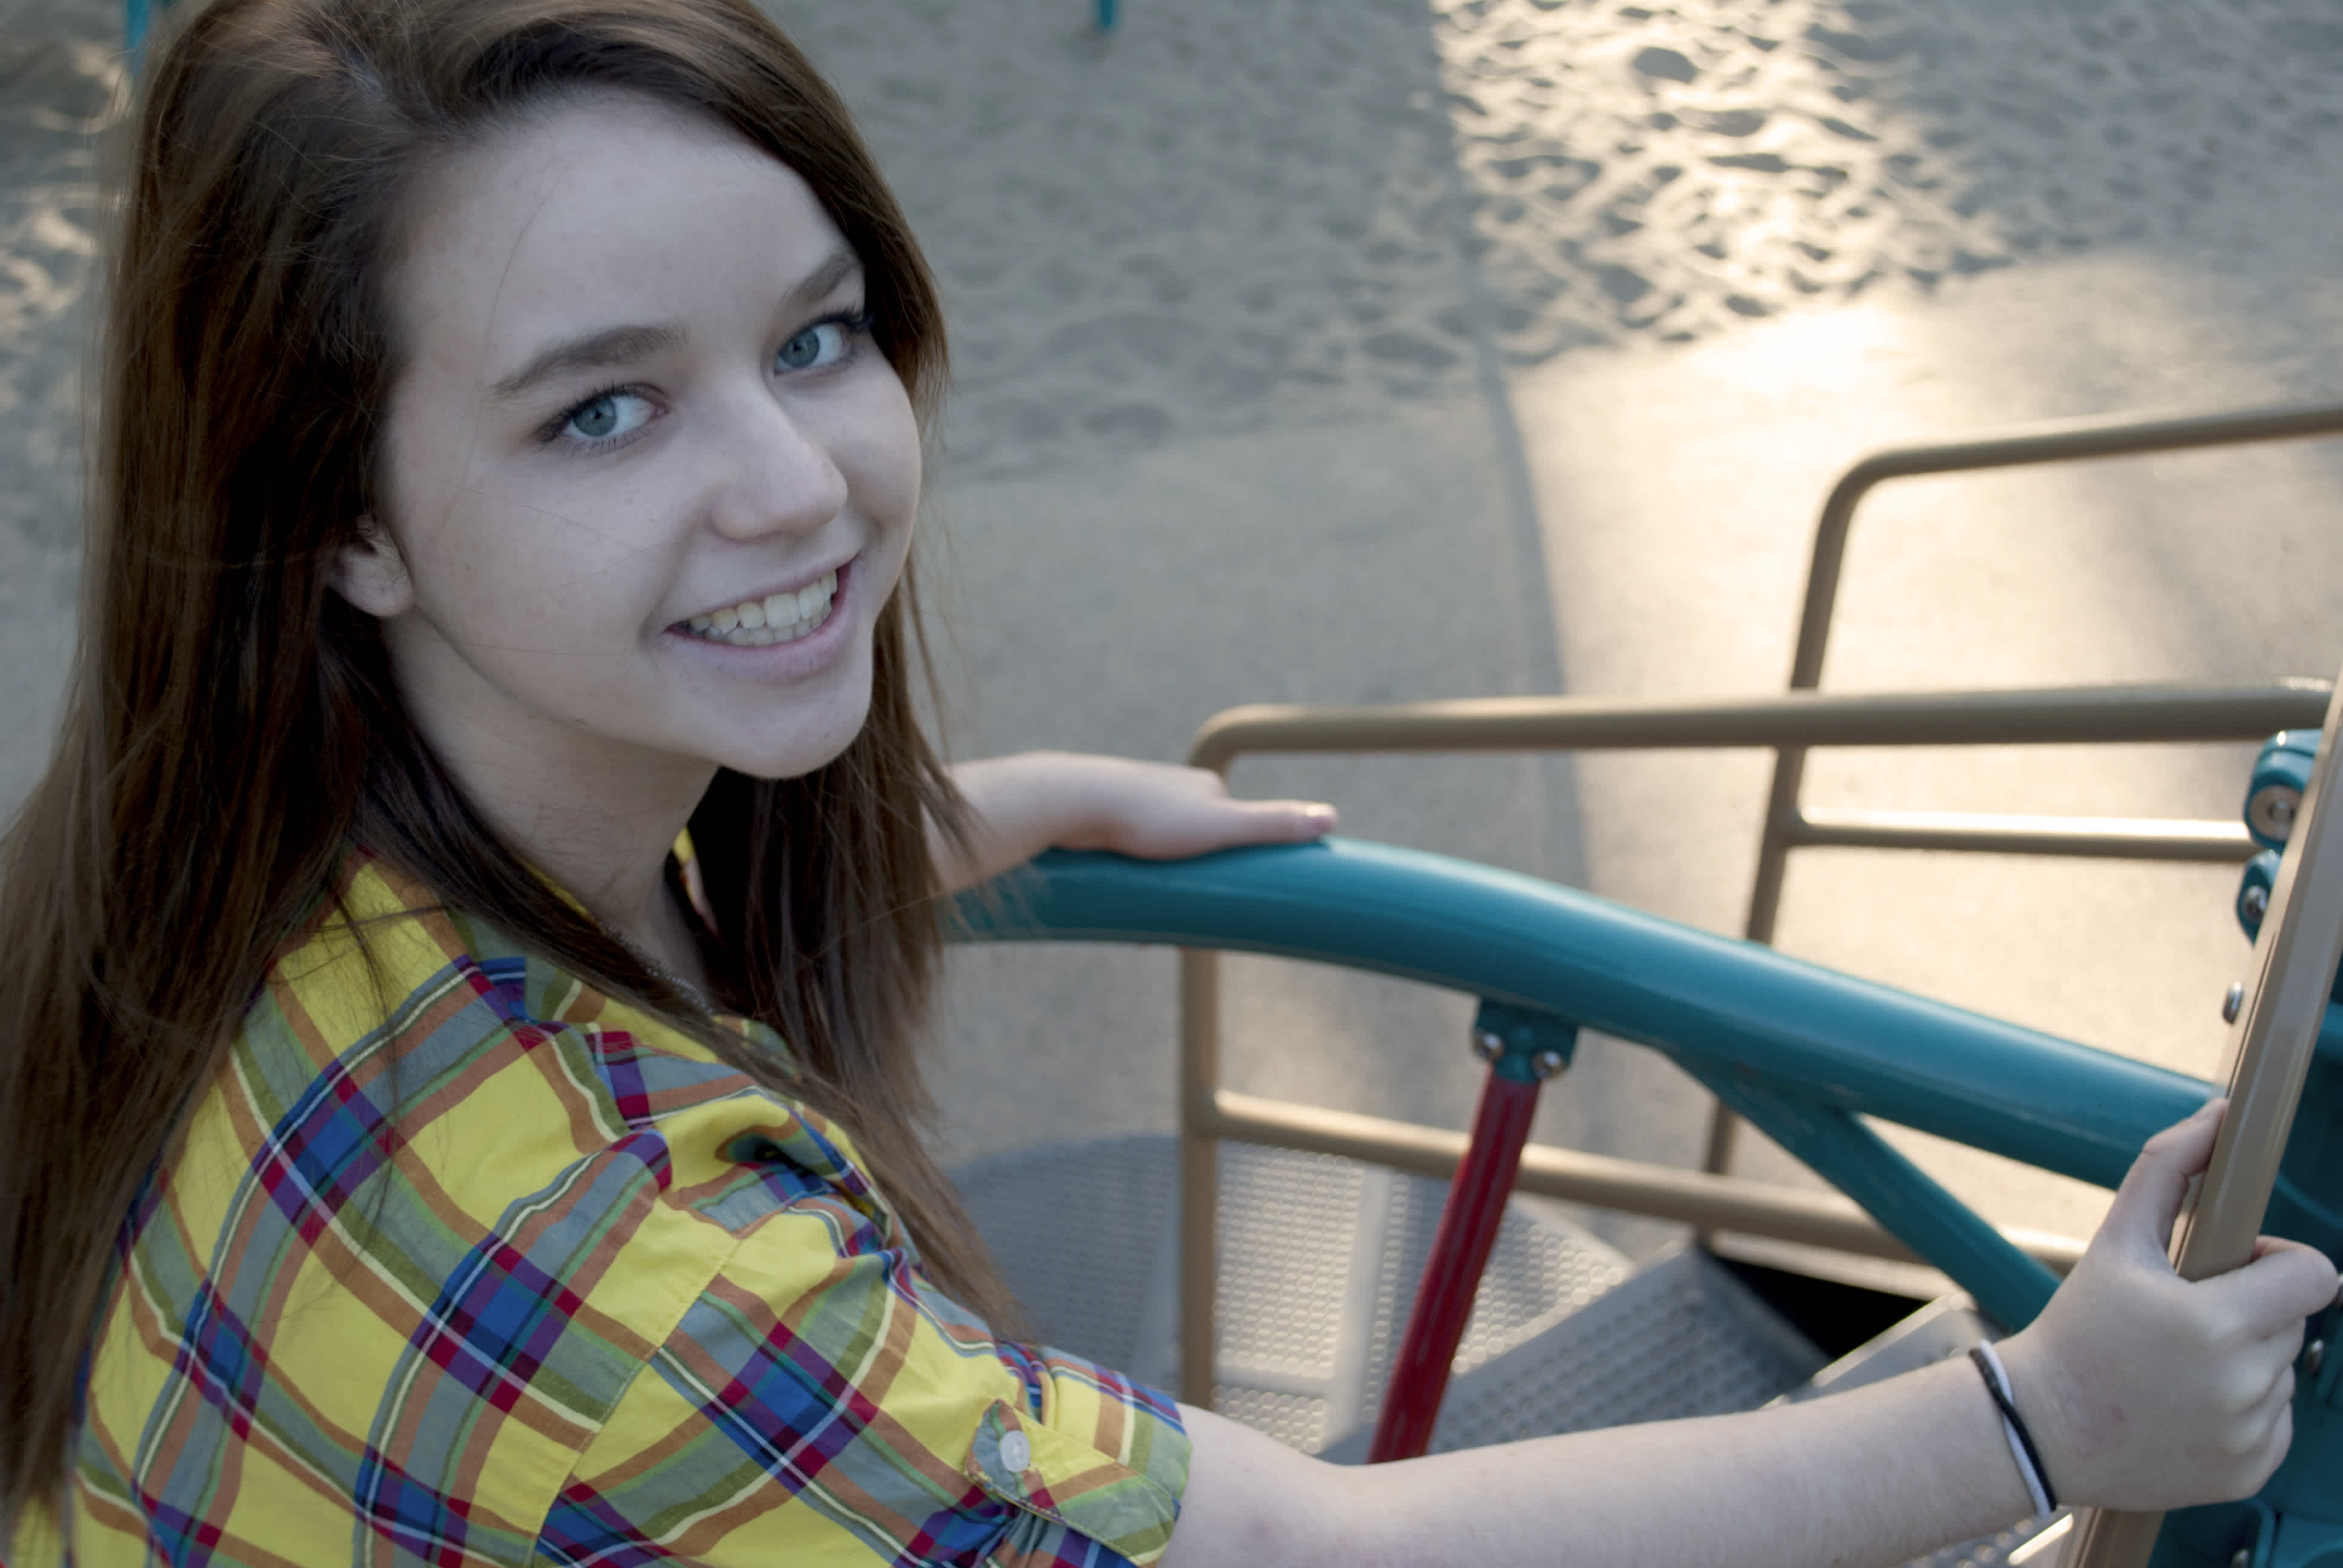 Girl wearing yellow and blue plaid in front of railing.